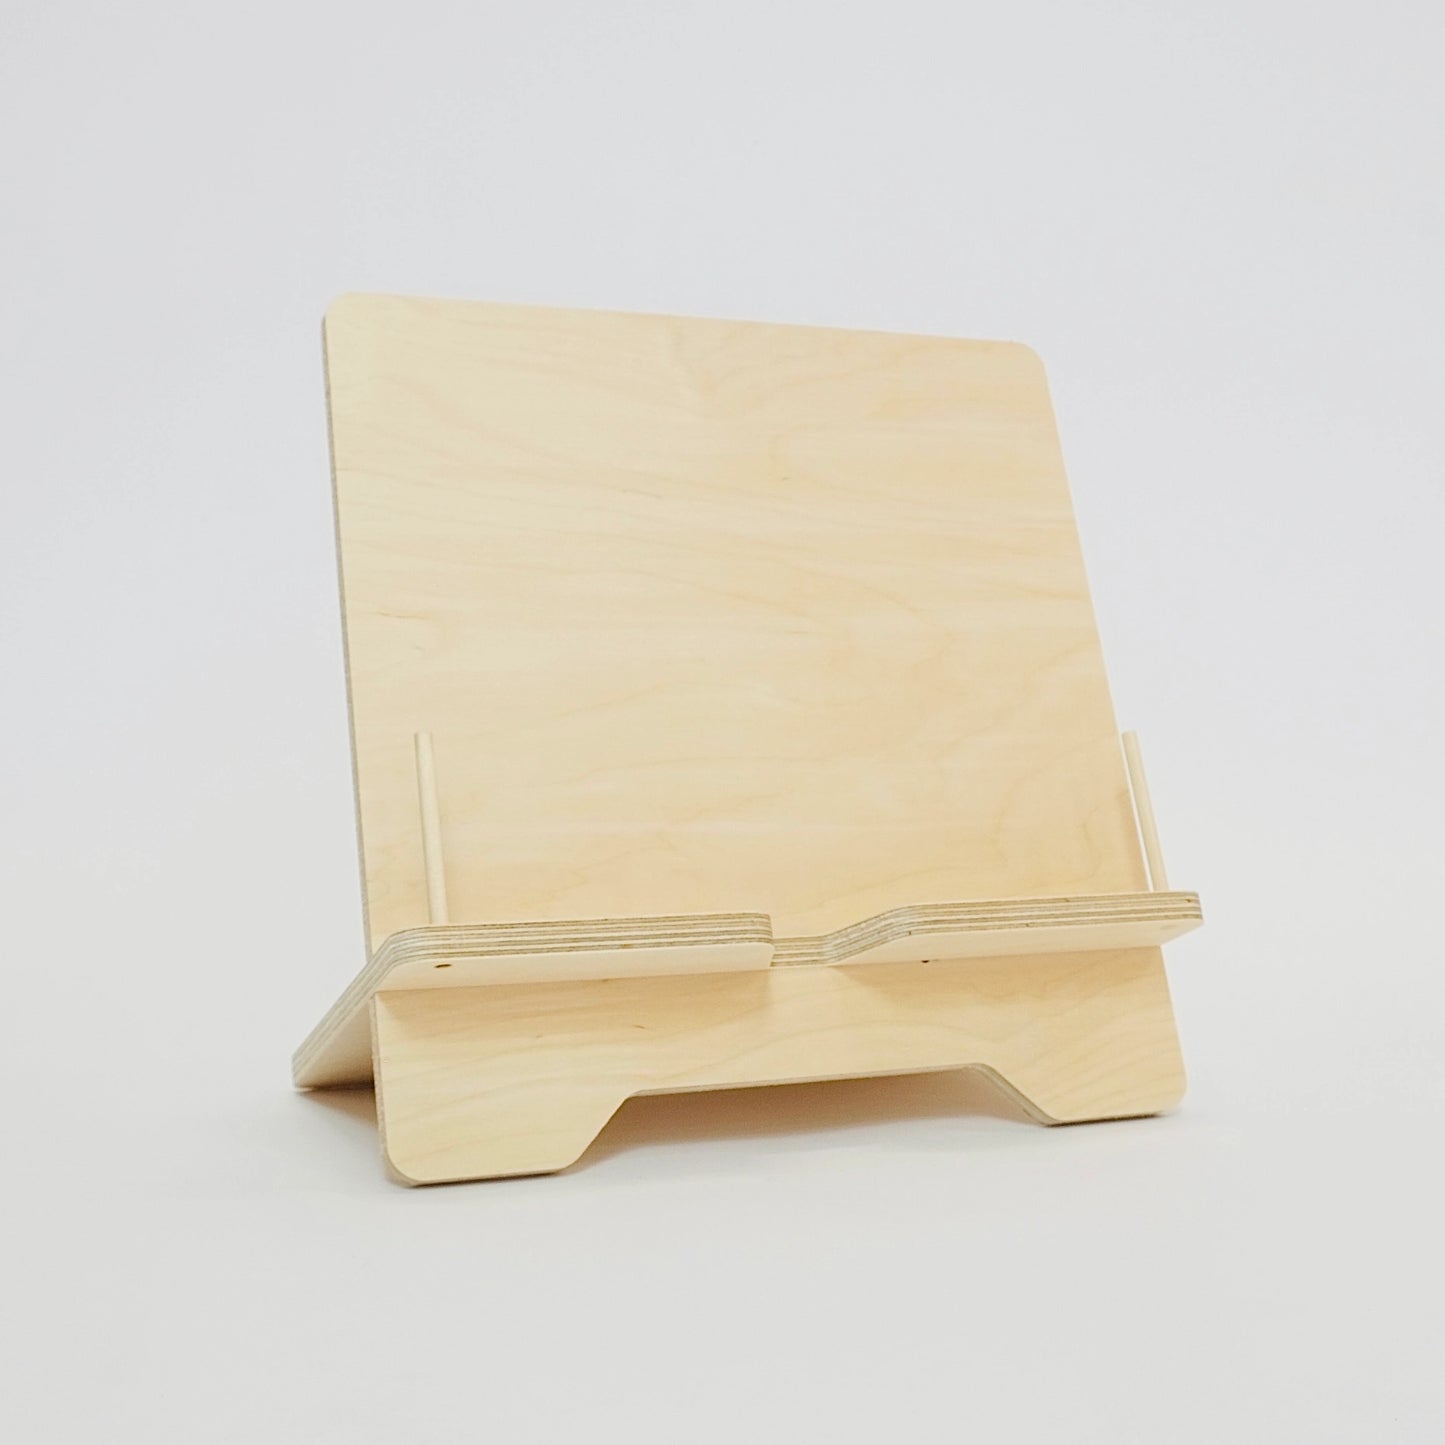 Front facing wooden plywood book stand with pegs to hold pages open